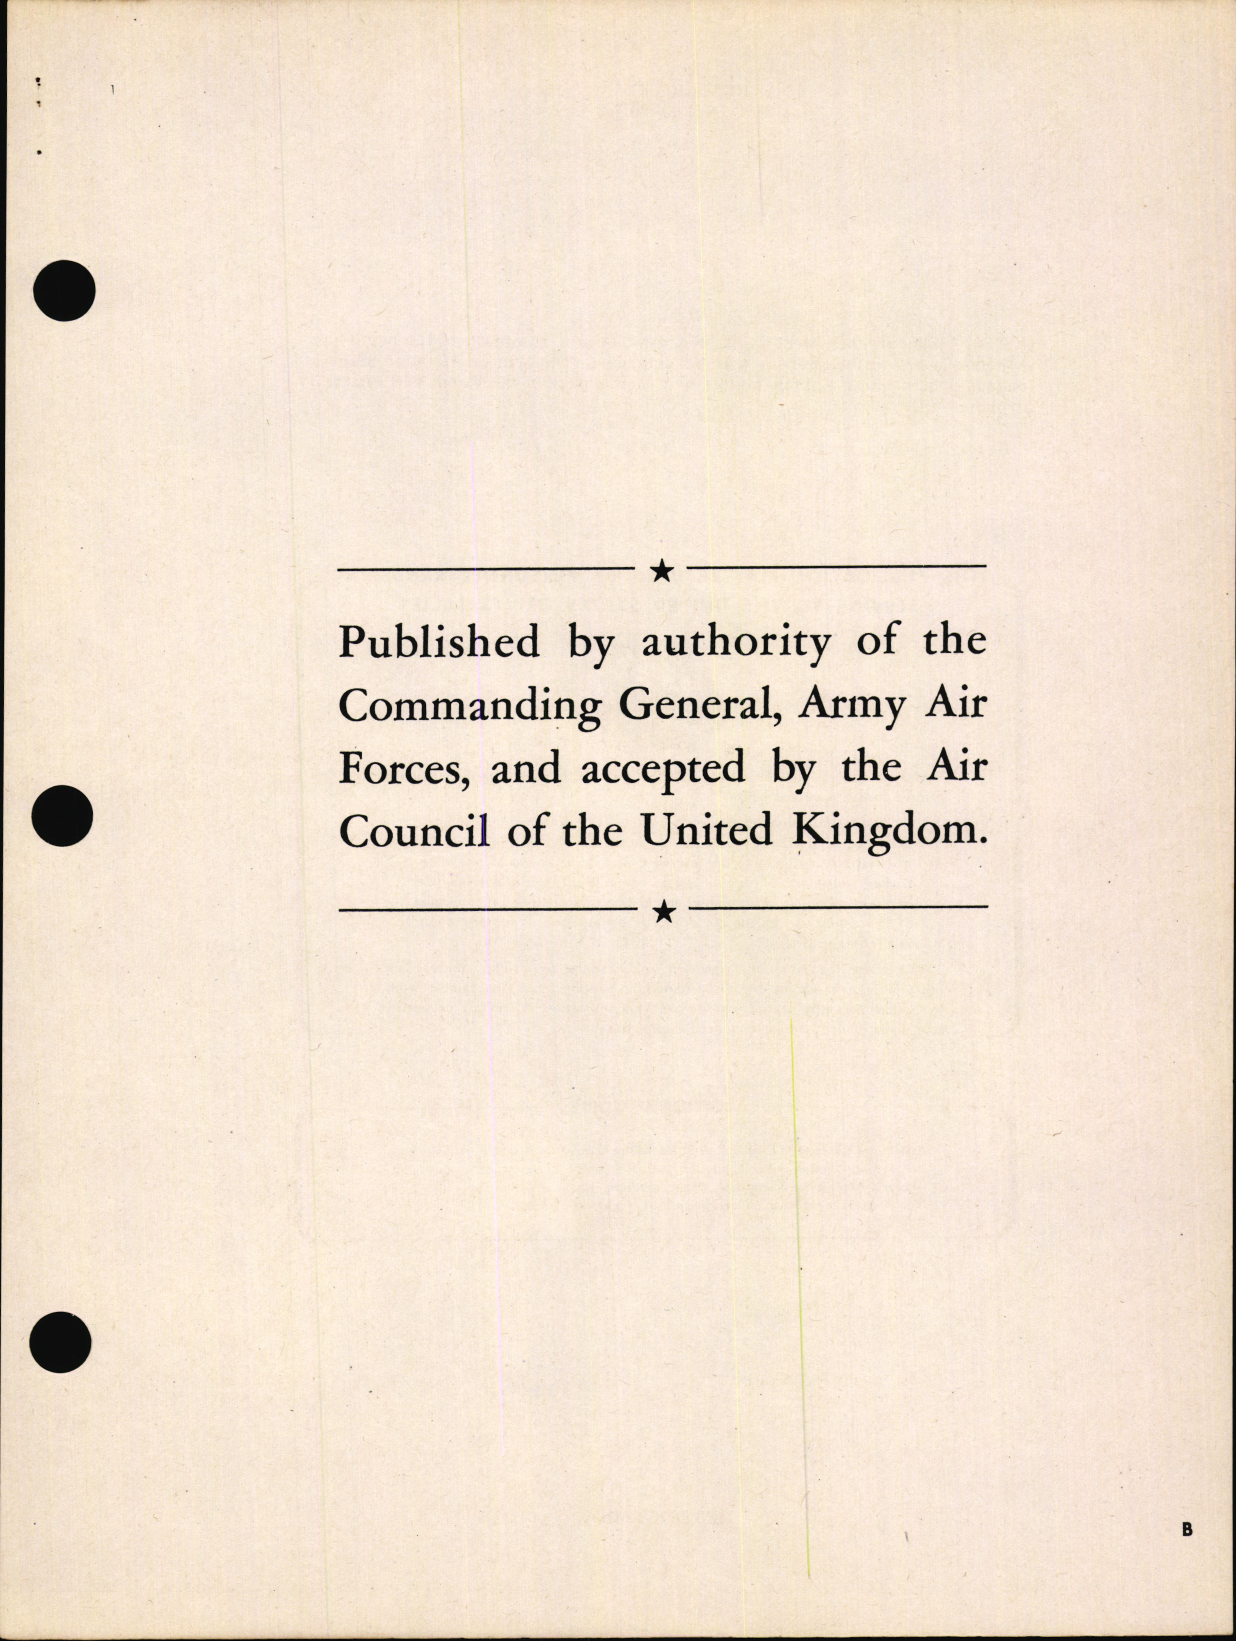 Sample page 3 from AirCorps Library document: Handbook of Instructions with Parts Catalog for Oxygen Flow Indicators MK-II and MK-III